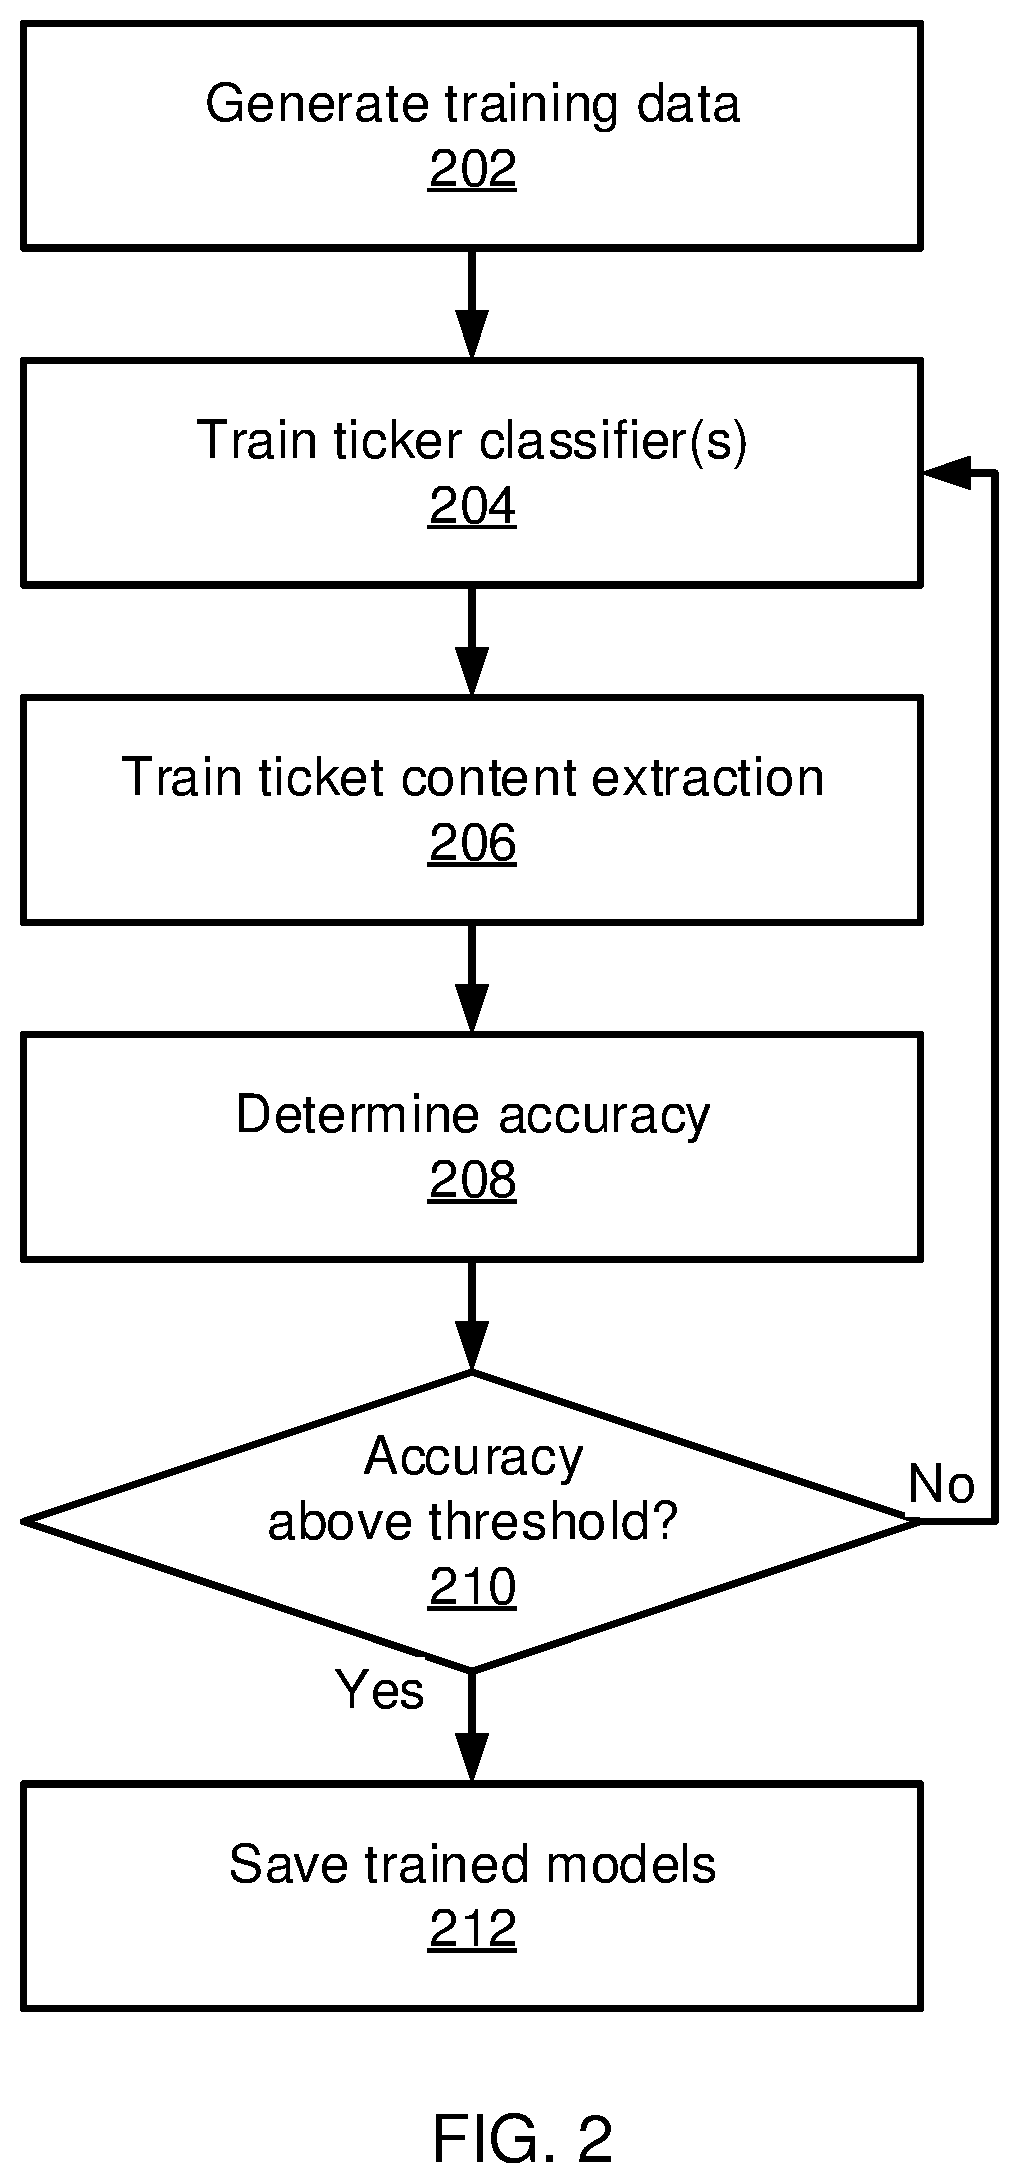 Hybrid learning-based ticket classification and response